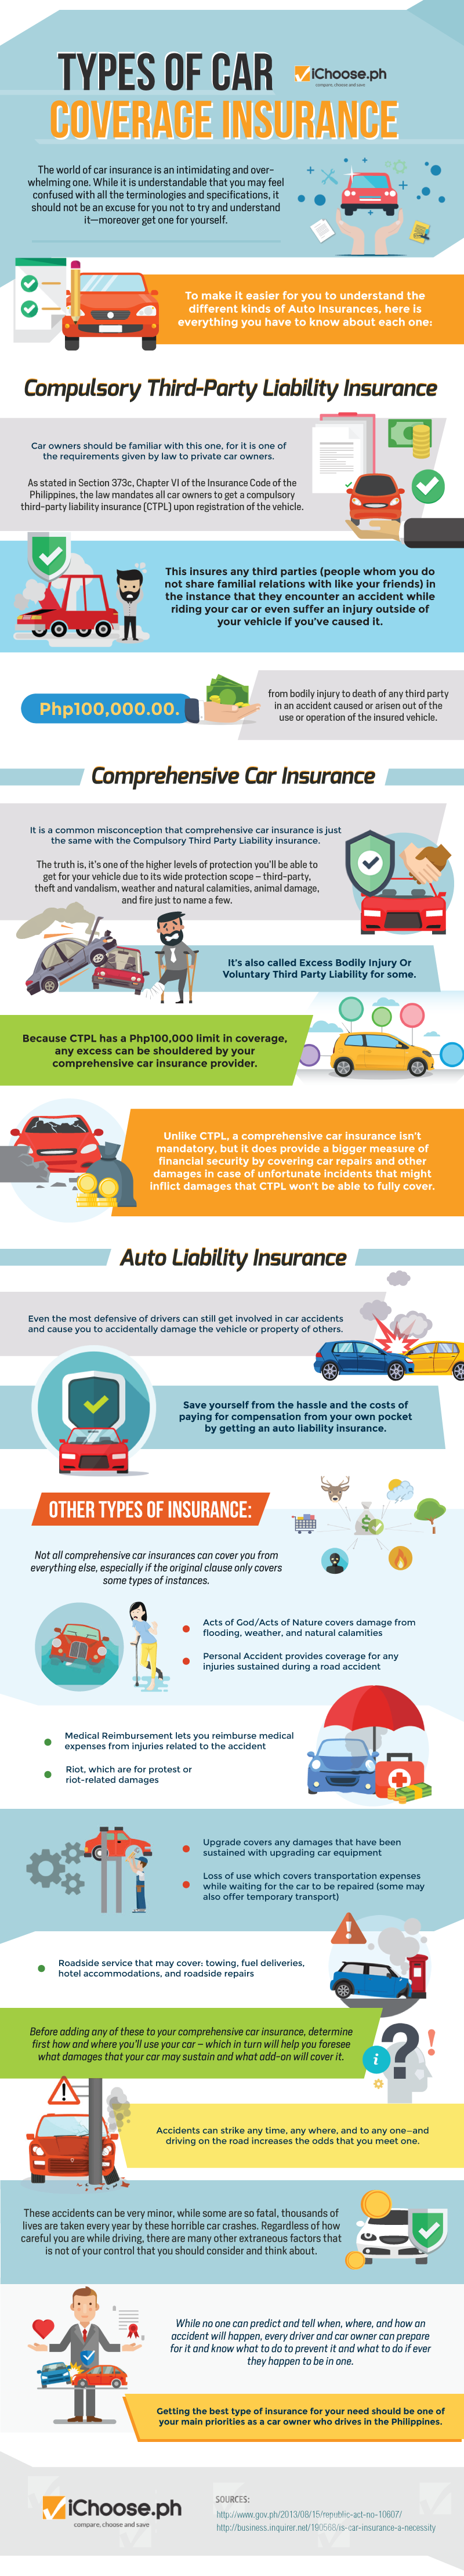 Types of Car Coverage Insurance